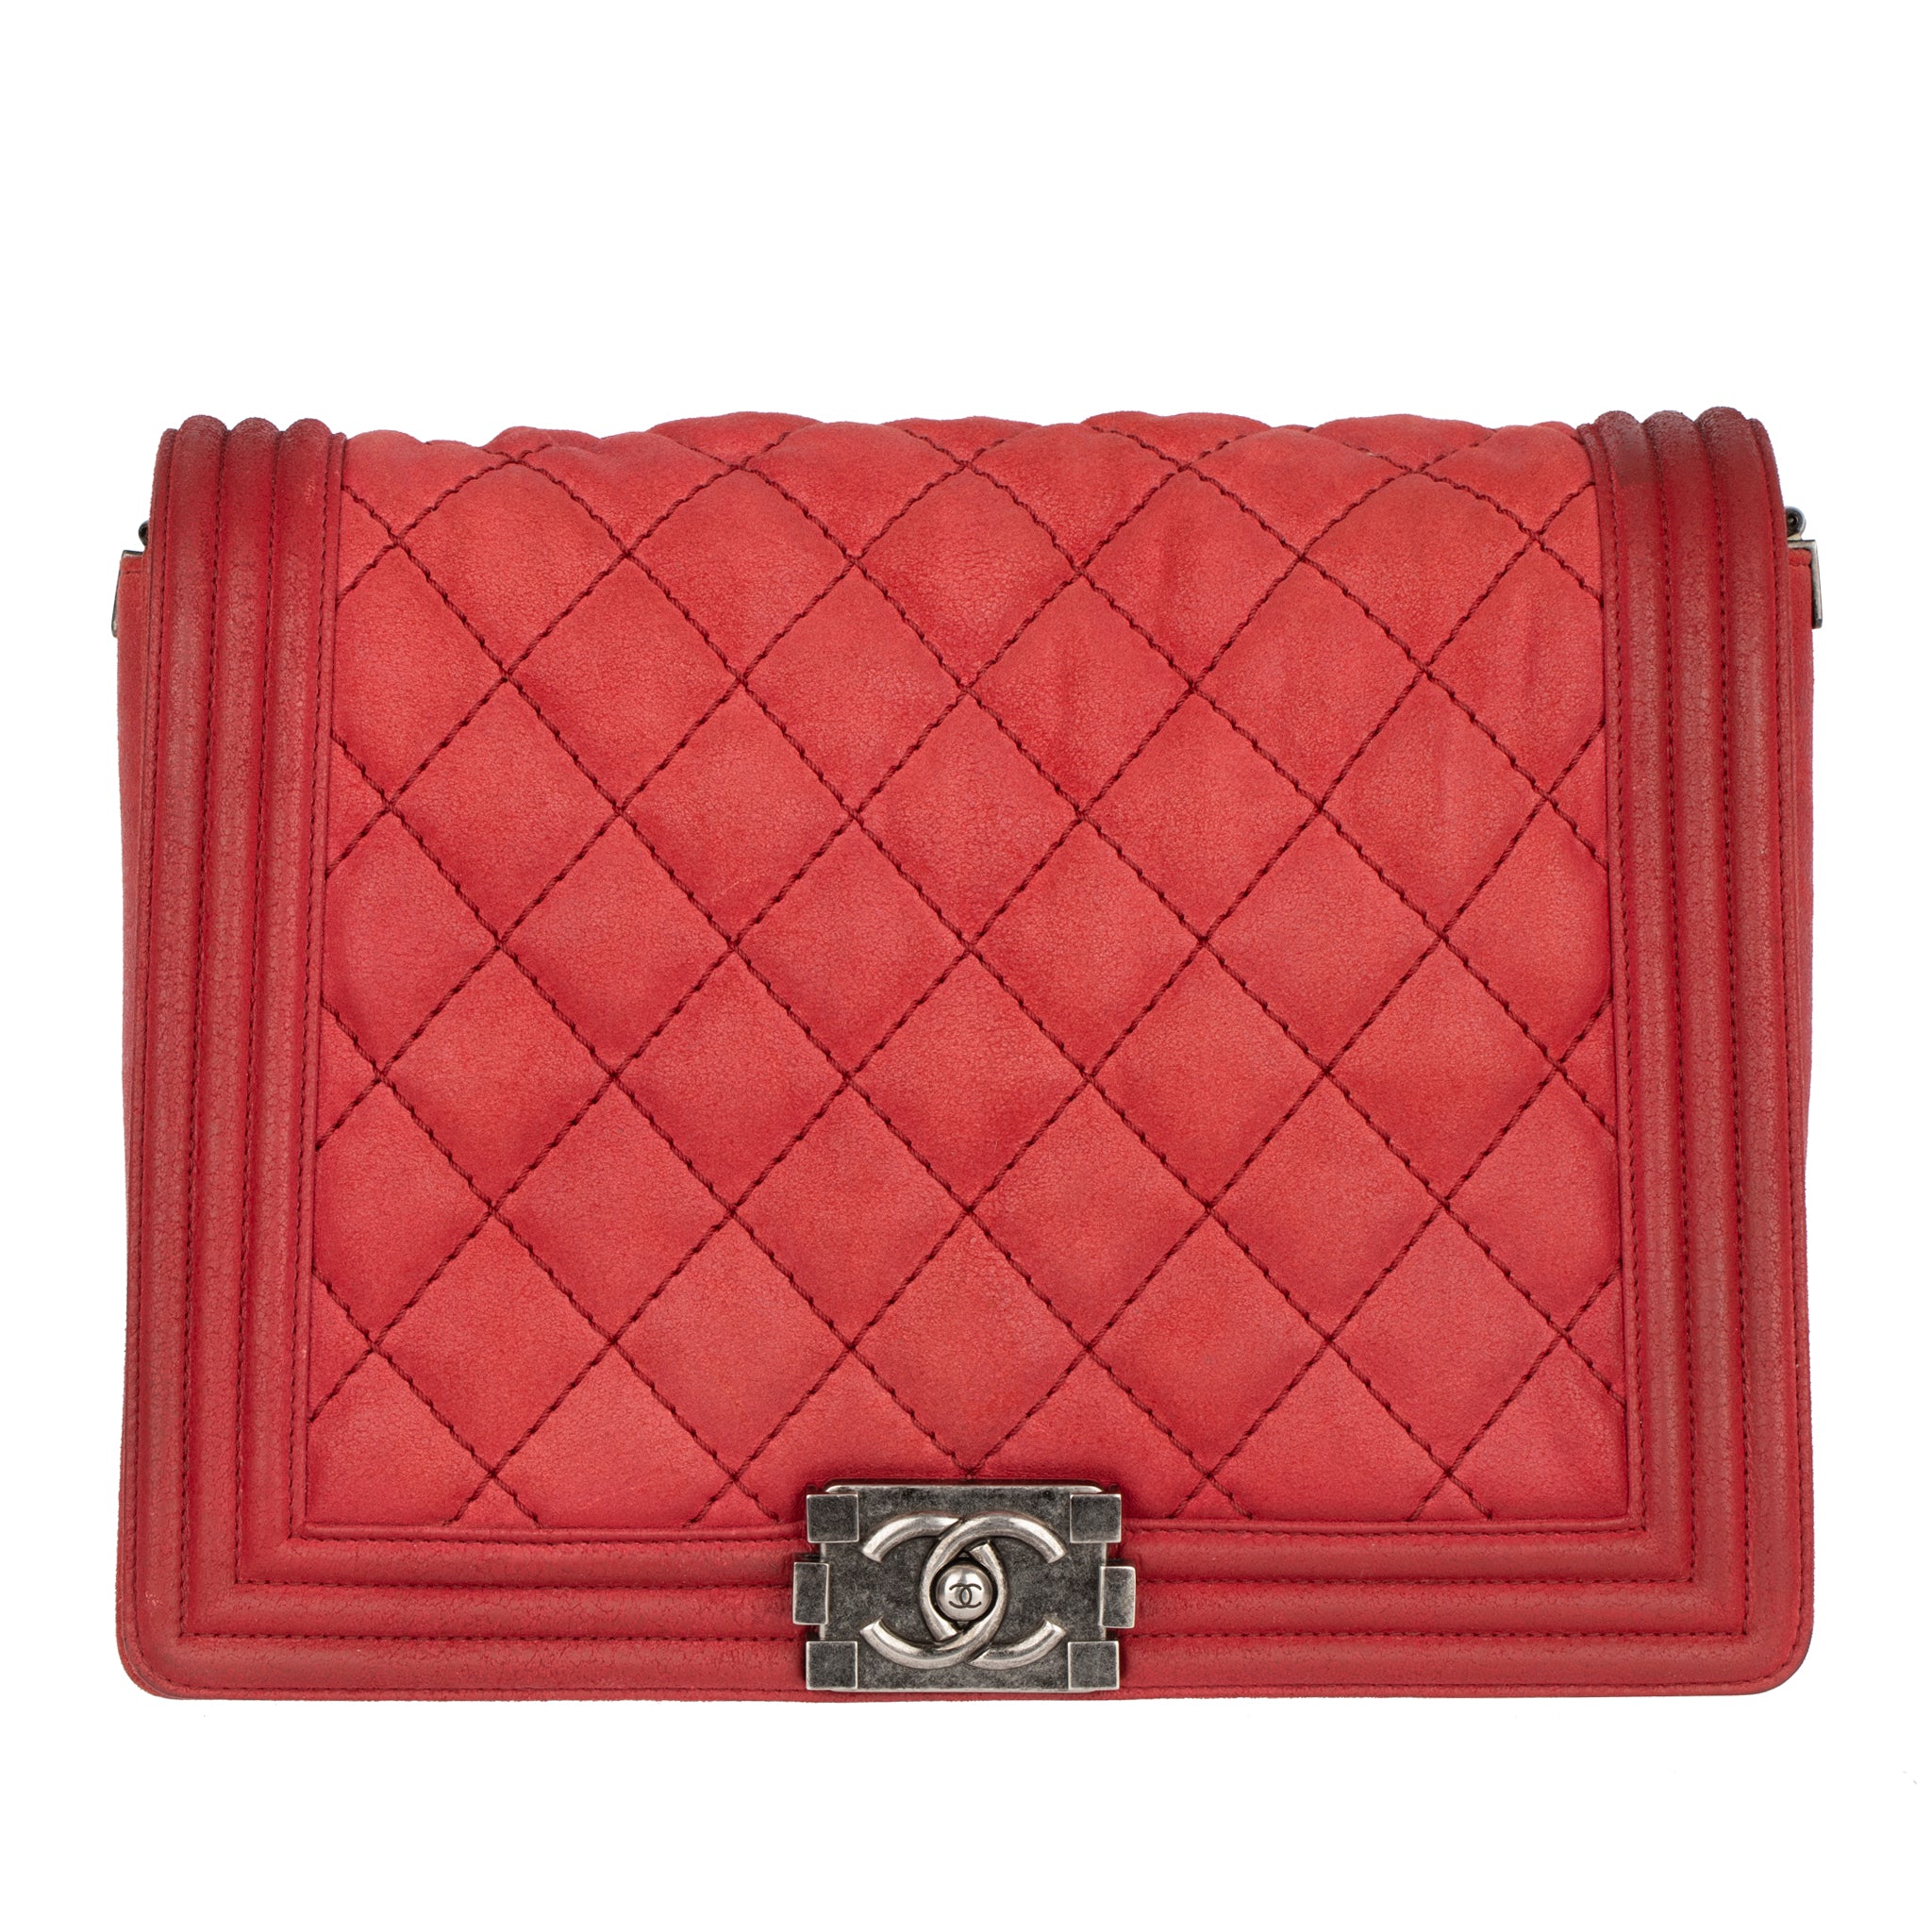 Chanel Red Quilted Suede Large Boy Flap Bag